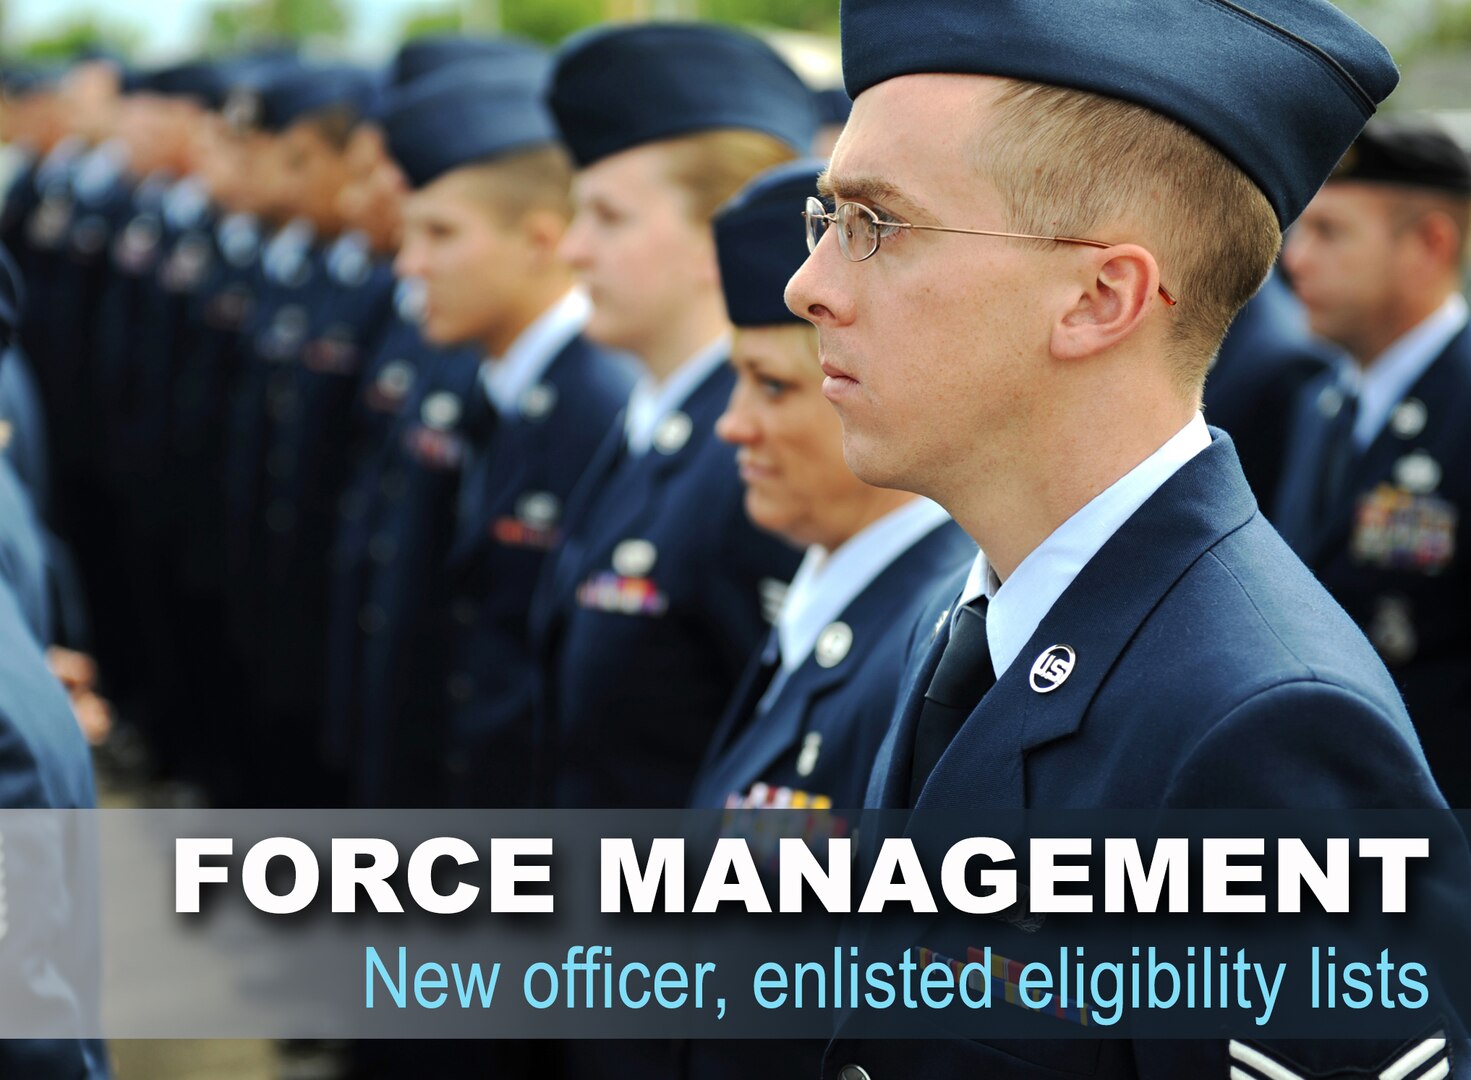 Officers from 33 Air Force specialty codes by year group and enlisted Airmen from seven AFSCs by grade are now eligible to apply for voluntary force management programs. In addition, officers in 70 AFSCs by year group and enlisted members in 178 AFSCs by grade are no longer eligible to apply for voluntary programs, and they will not meet an involuntary board in FY14. (Courtesy Graphic)